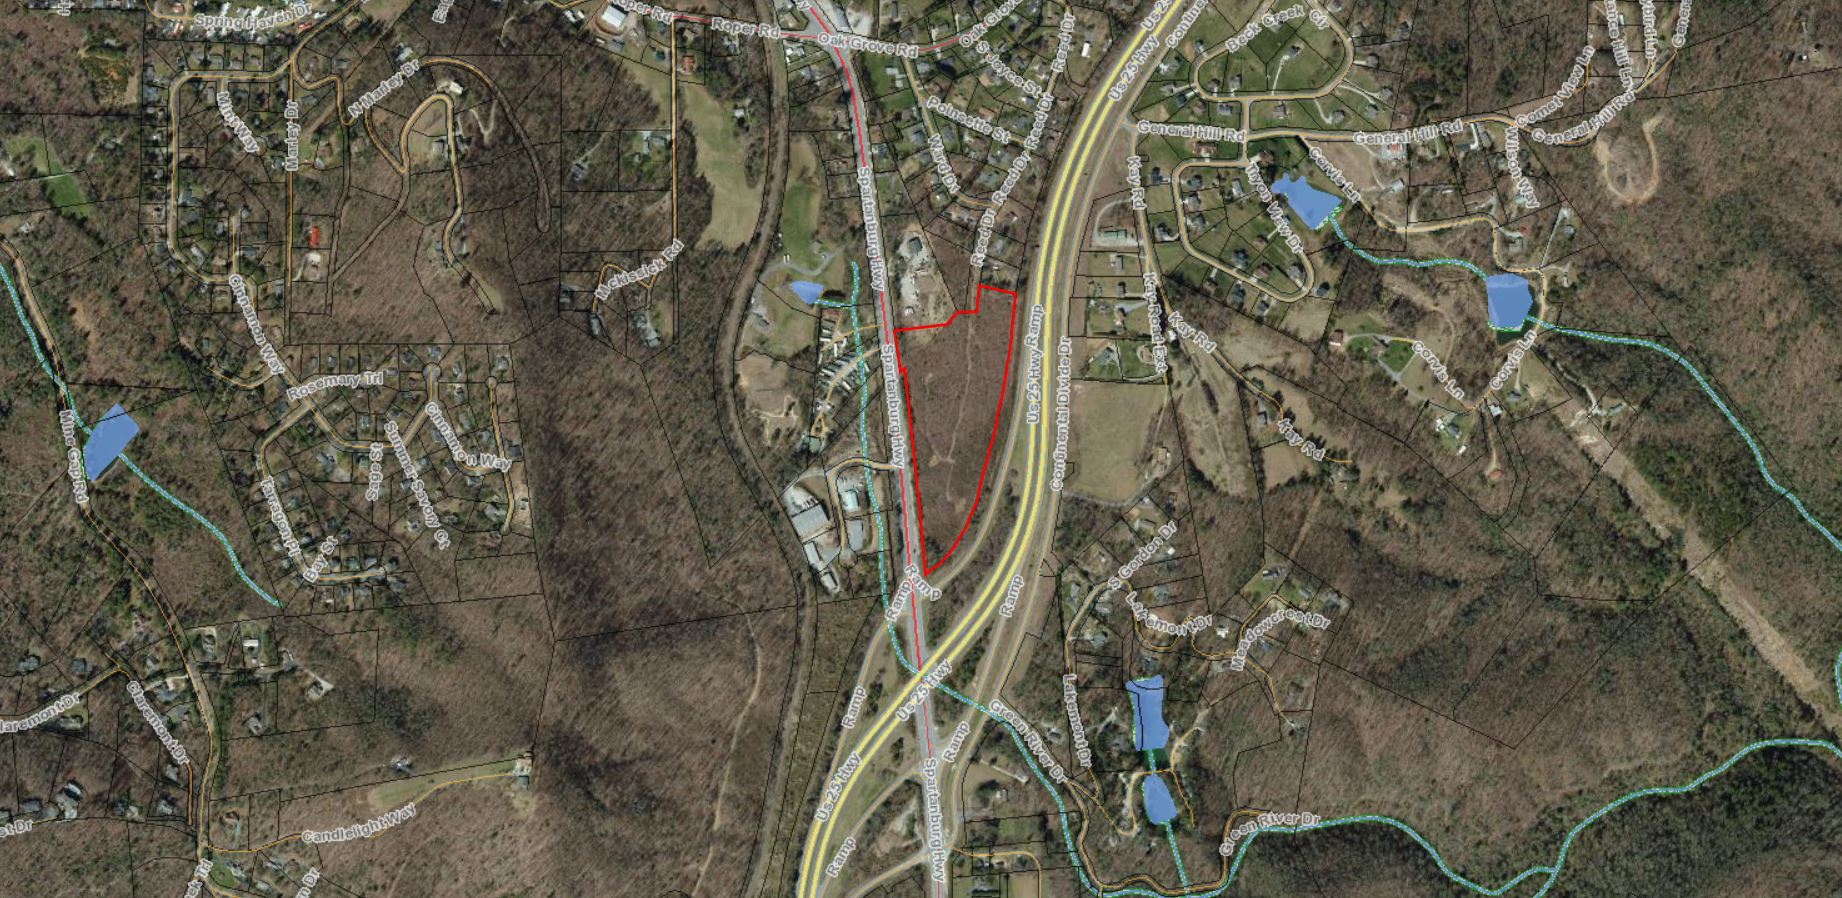 Proposed site for asphalt drum plant planned in East Flat Rock, NC